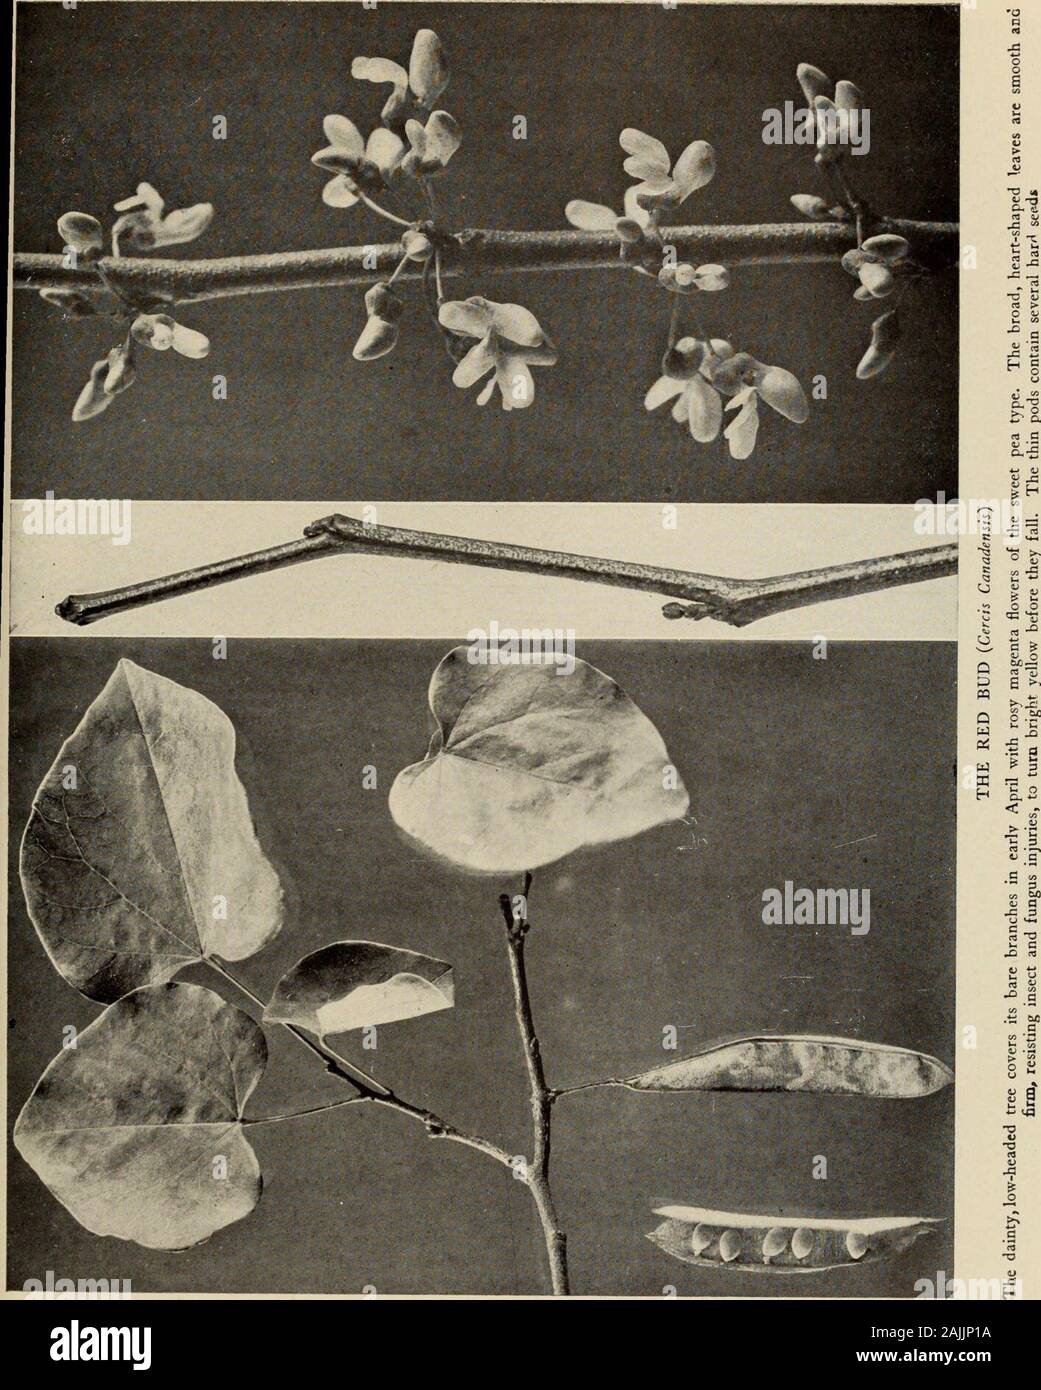 The tree book : A popular guide to a knowledge of the trees of North America and to their uses and cultivation . TO IMPORTANT GENERA AND SPECIES A. Foliage simple; flowers rosy, pea-like. i. Genus CERCIS, Linn. B. Leaves heart shaped. (C. Canadensis) redbud BB. Leaves kidney shaped. (C. Texensis) Texas redbud AA. Foliage compound. B. Leaves twice compound; flowers regular.C. Branches thorny; foliage fleecy. 2. Genus GLEDITSIA, Linn. D. Pods 12 to 18 inches long, pulpy, many-seeded. (G. triacanthos) honey locustDD. Pods 4 to 5 inches long, without pulp, many-seeded. (G. Texana) texan honey locu Stock Photo